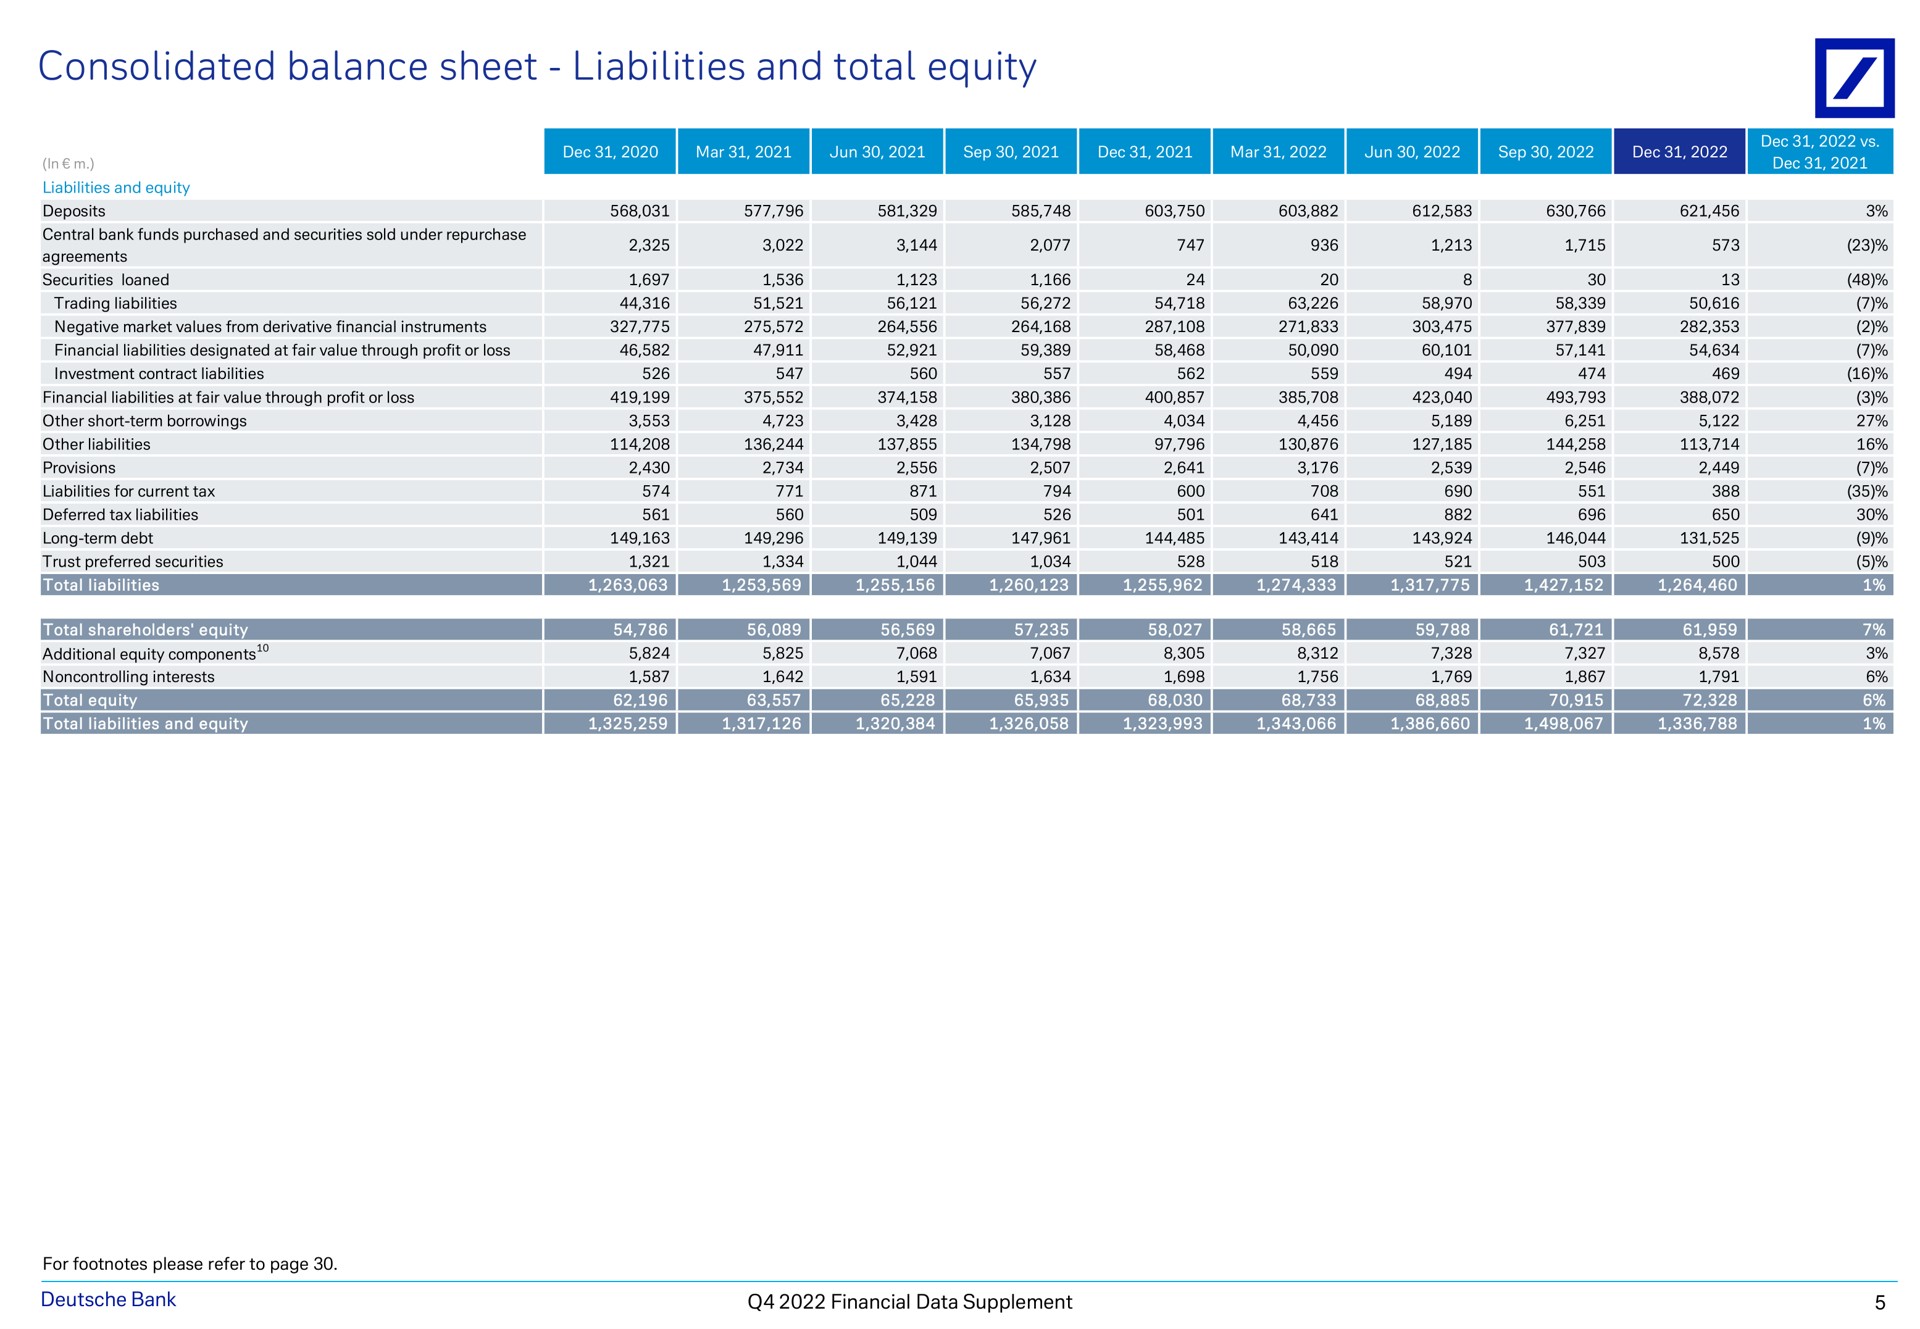 consolidated balance sheet liabilities and total equity sets taste arete seen sess ses bank financial data supplement | Deutsche Bank